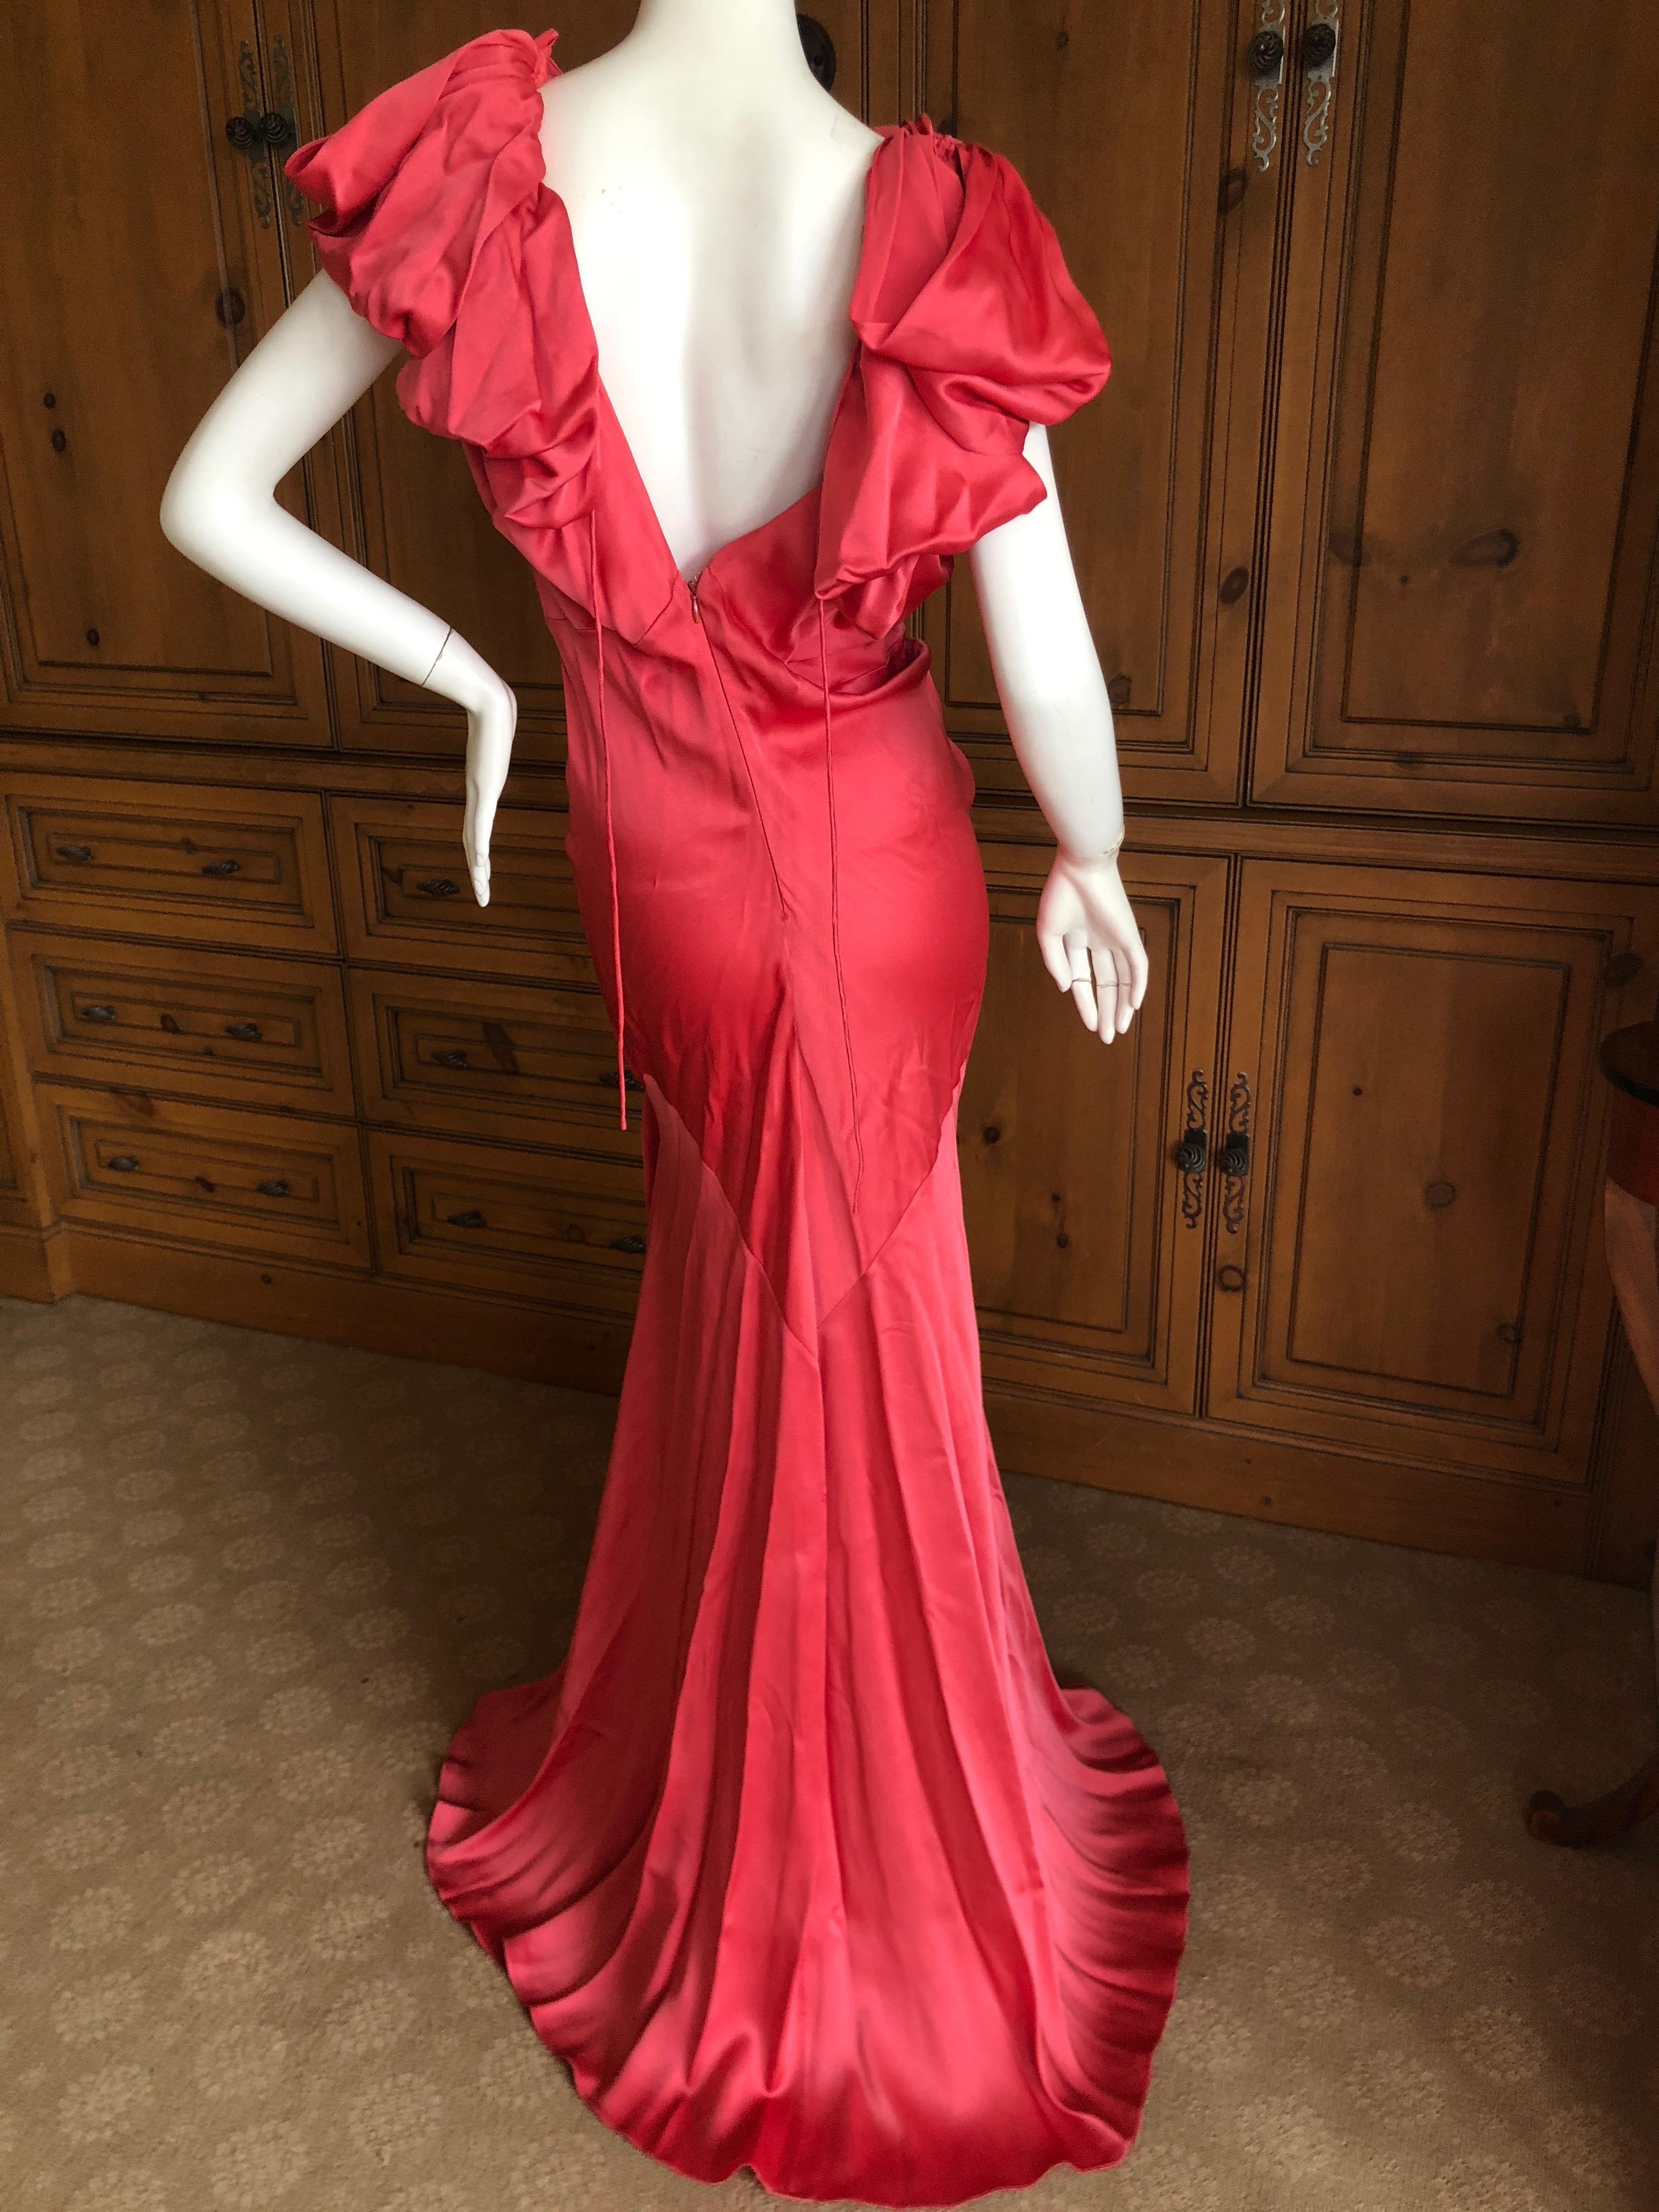 John Galliano Salmon Color Dramatic Bias Cut Evening Dress Spring 2002 In Excellent Condition For Sale In Cloverdale, CA